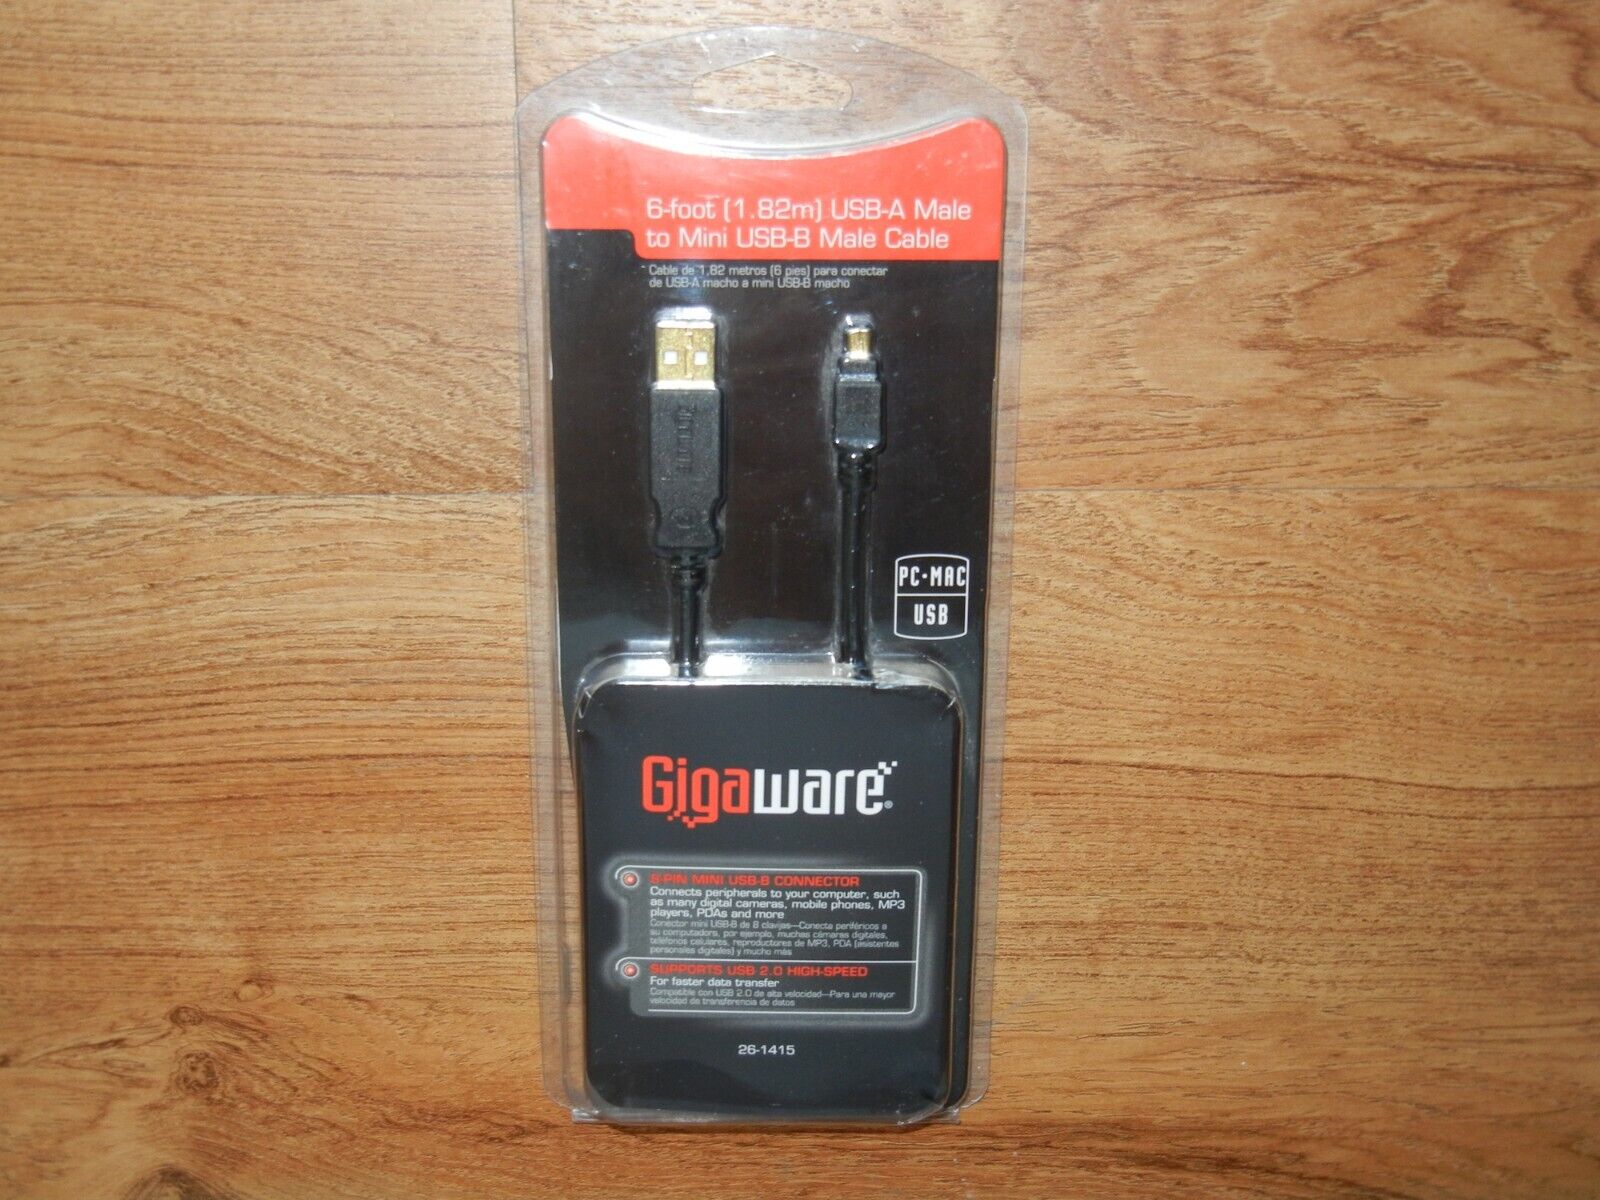 Gigaware 26-1415 6-foot USB-A Male to Mini USB-B Male Cable, New